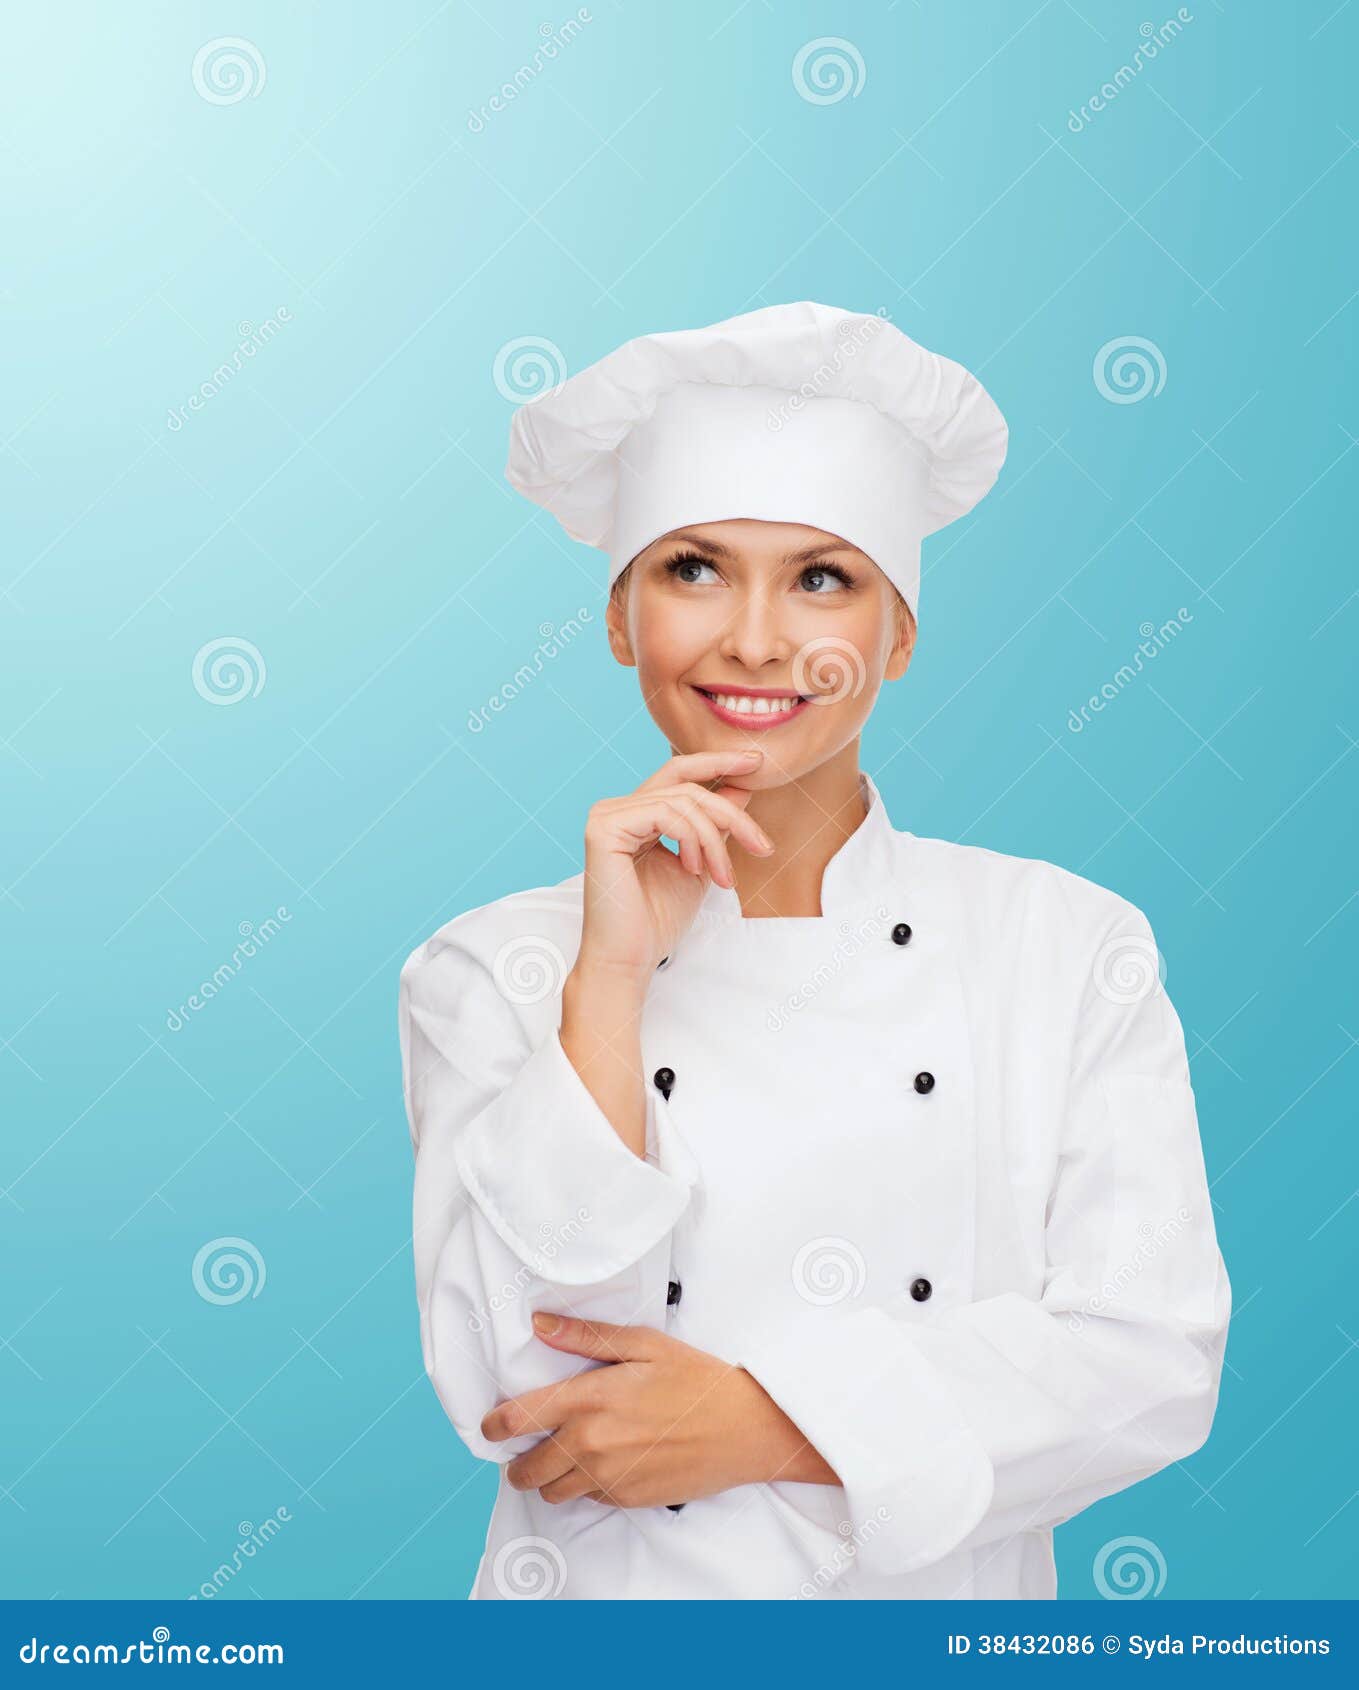 Smiling Female Chef Dreaming Stock Photo - Image of dreaming, choice ...